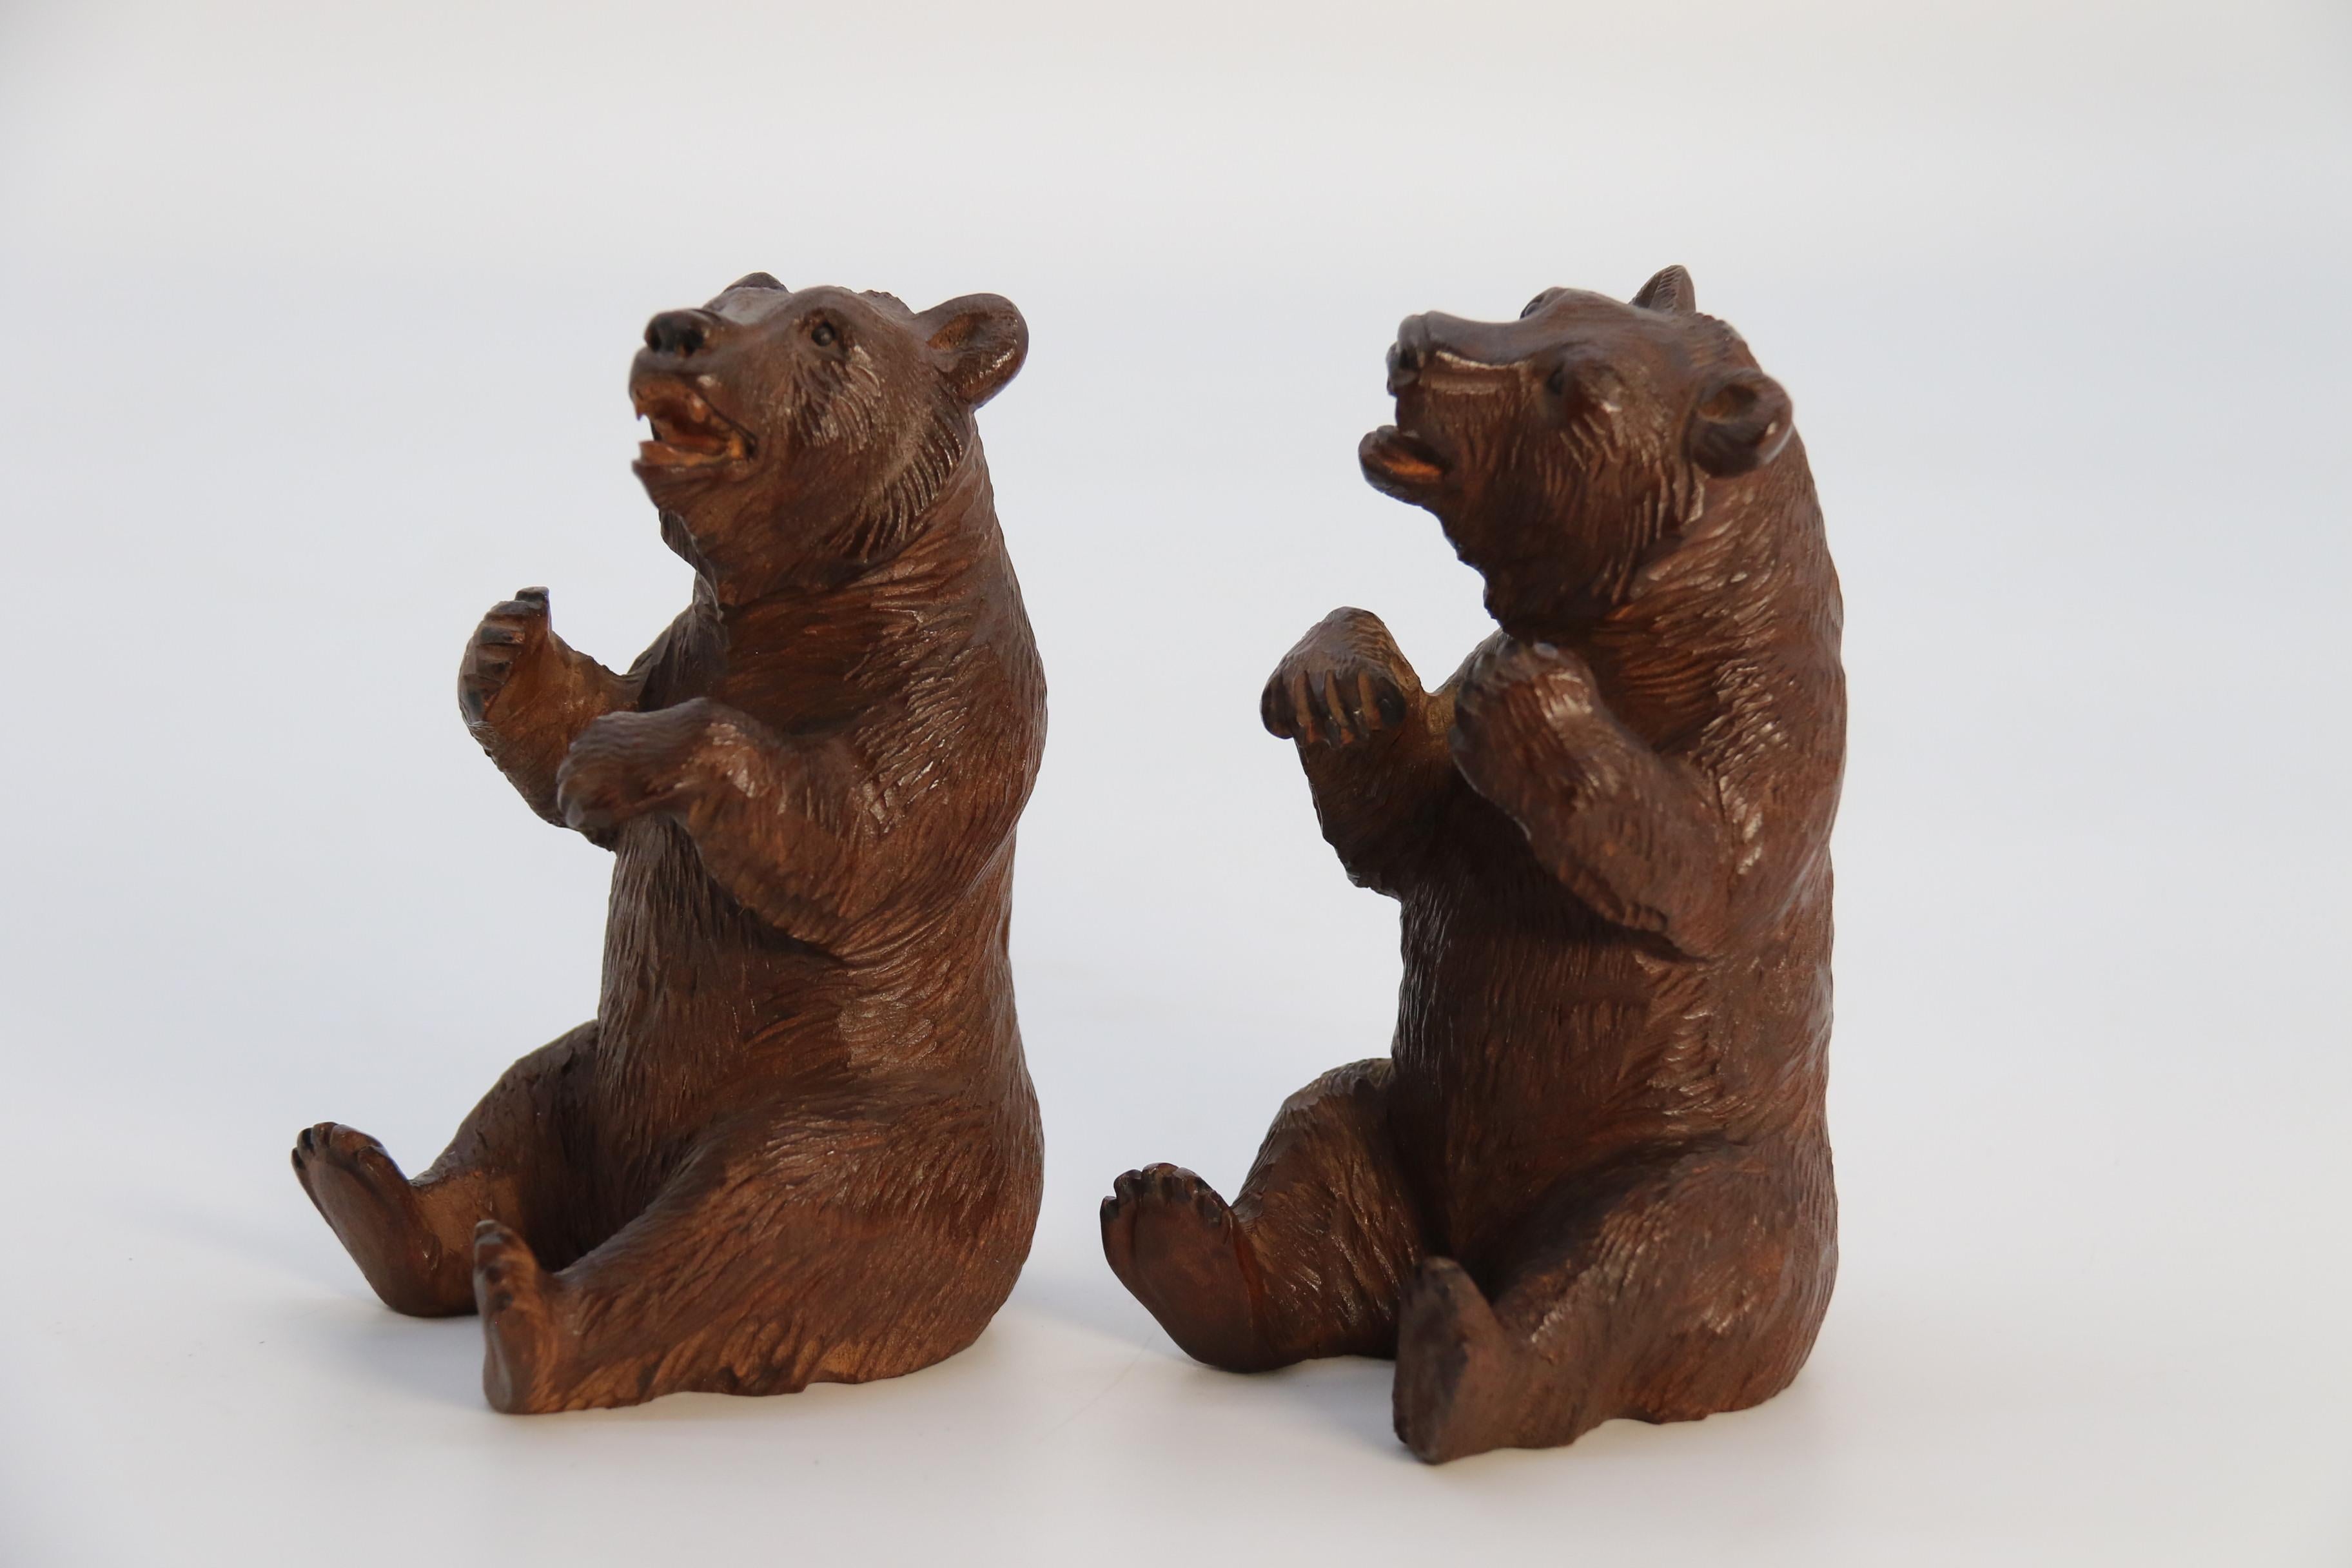 This delightful pair of Swiss/ German black forest carved linden wood seated bears is rarely available as an original pair. They are beautifully hand carved and are left and right handed. The artist has cleverly captured his subject with great